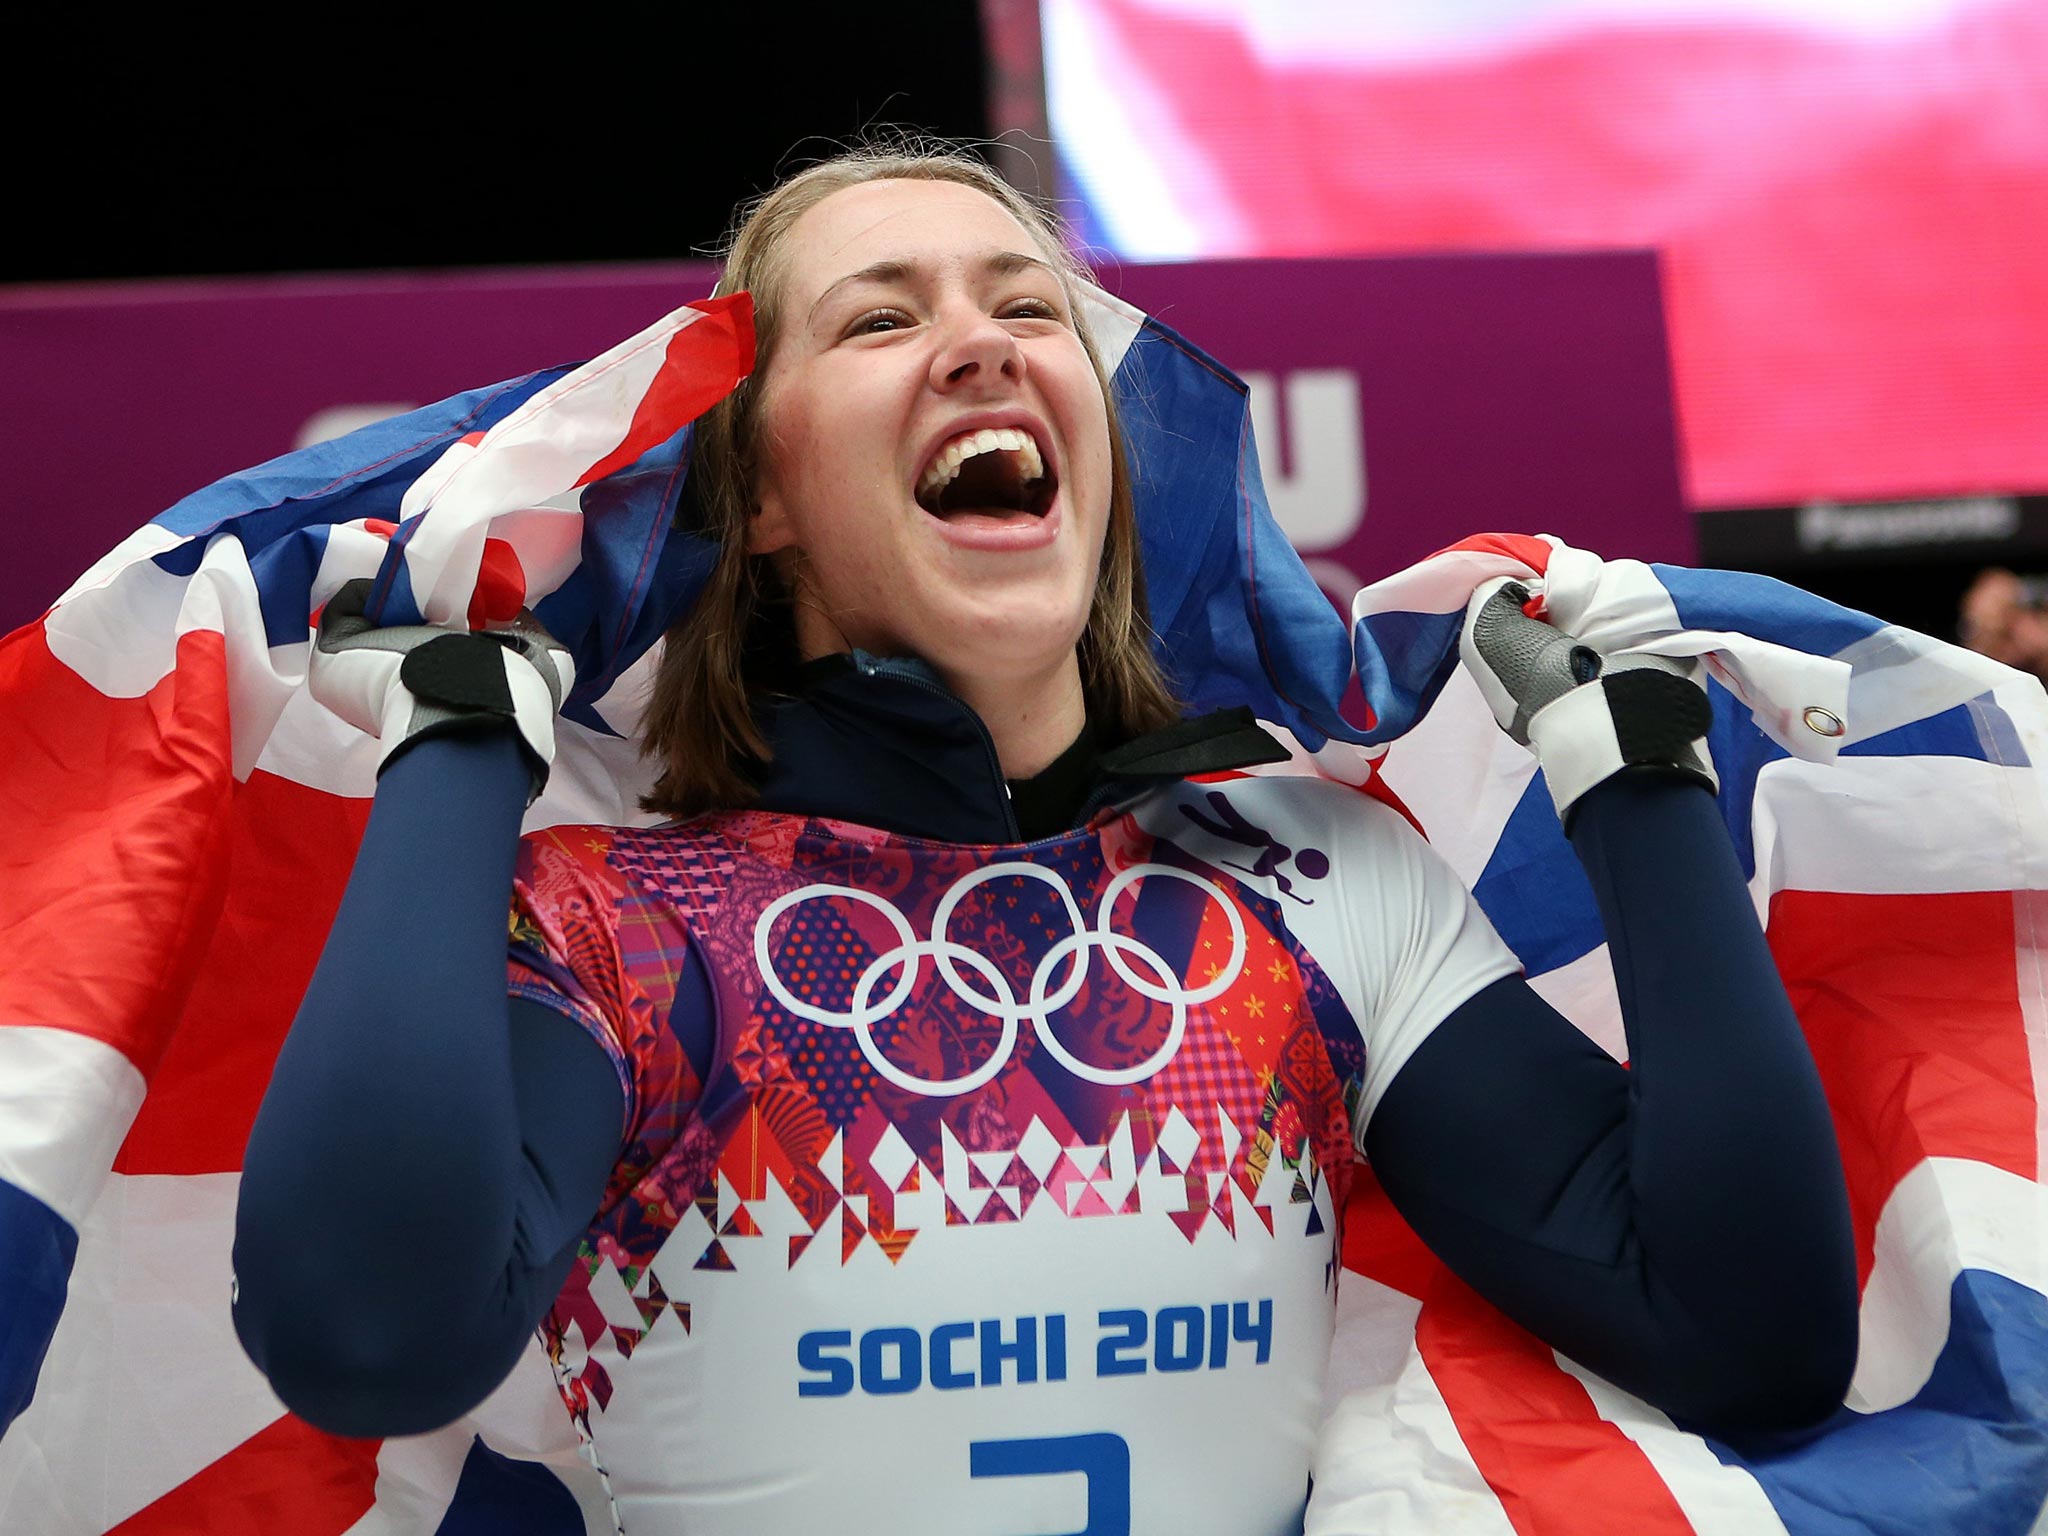 Great Britain's Lizzy Yarnold celebrates after winning Gold in the Women's Skeleton Final during the 2014 Sochi Olympic Games